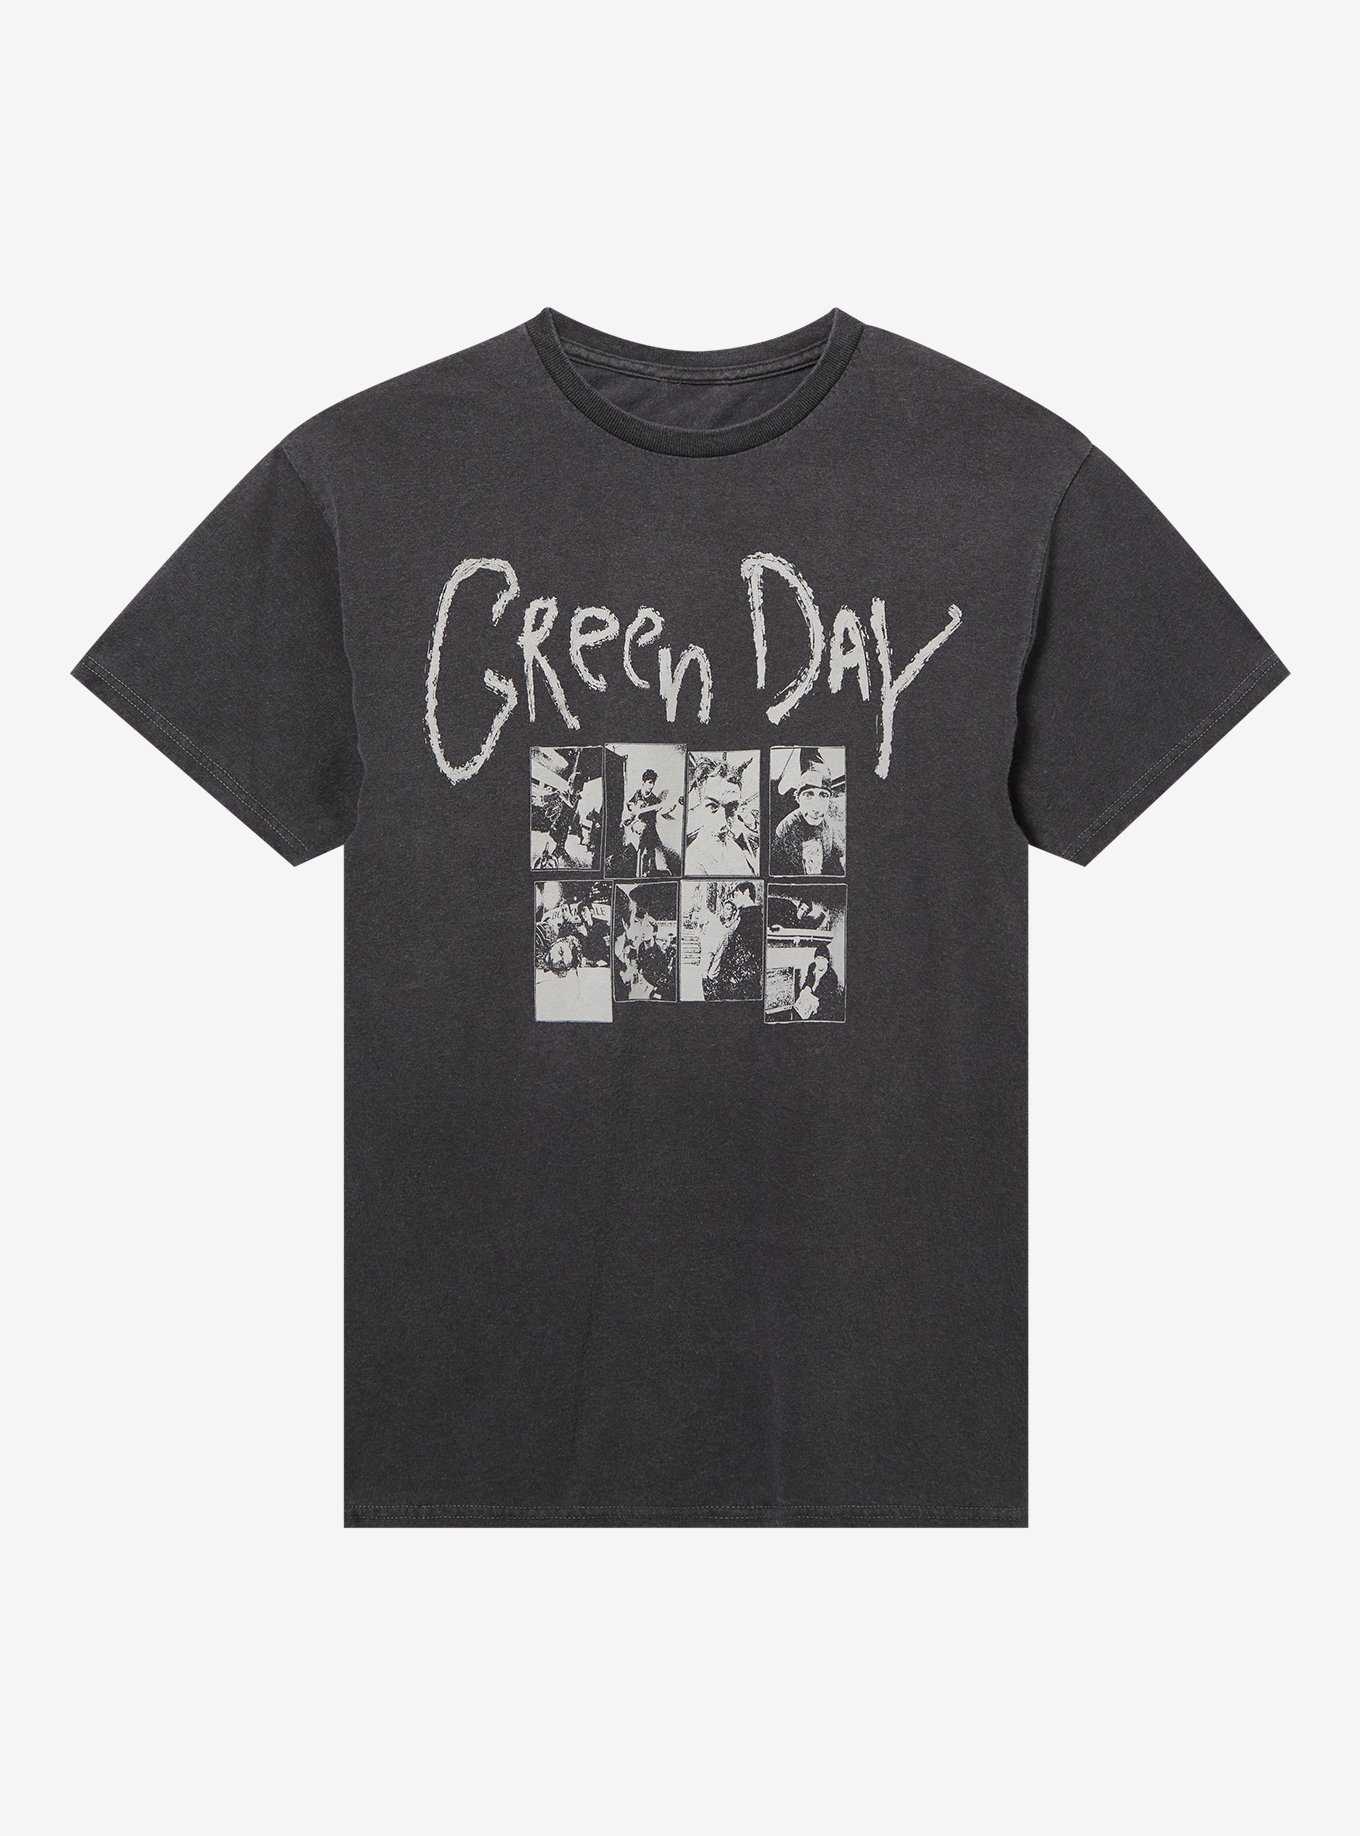 Green Day Photo Collage Washed Boyfriend Fit Girls T-Shirt, , hi-res